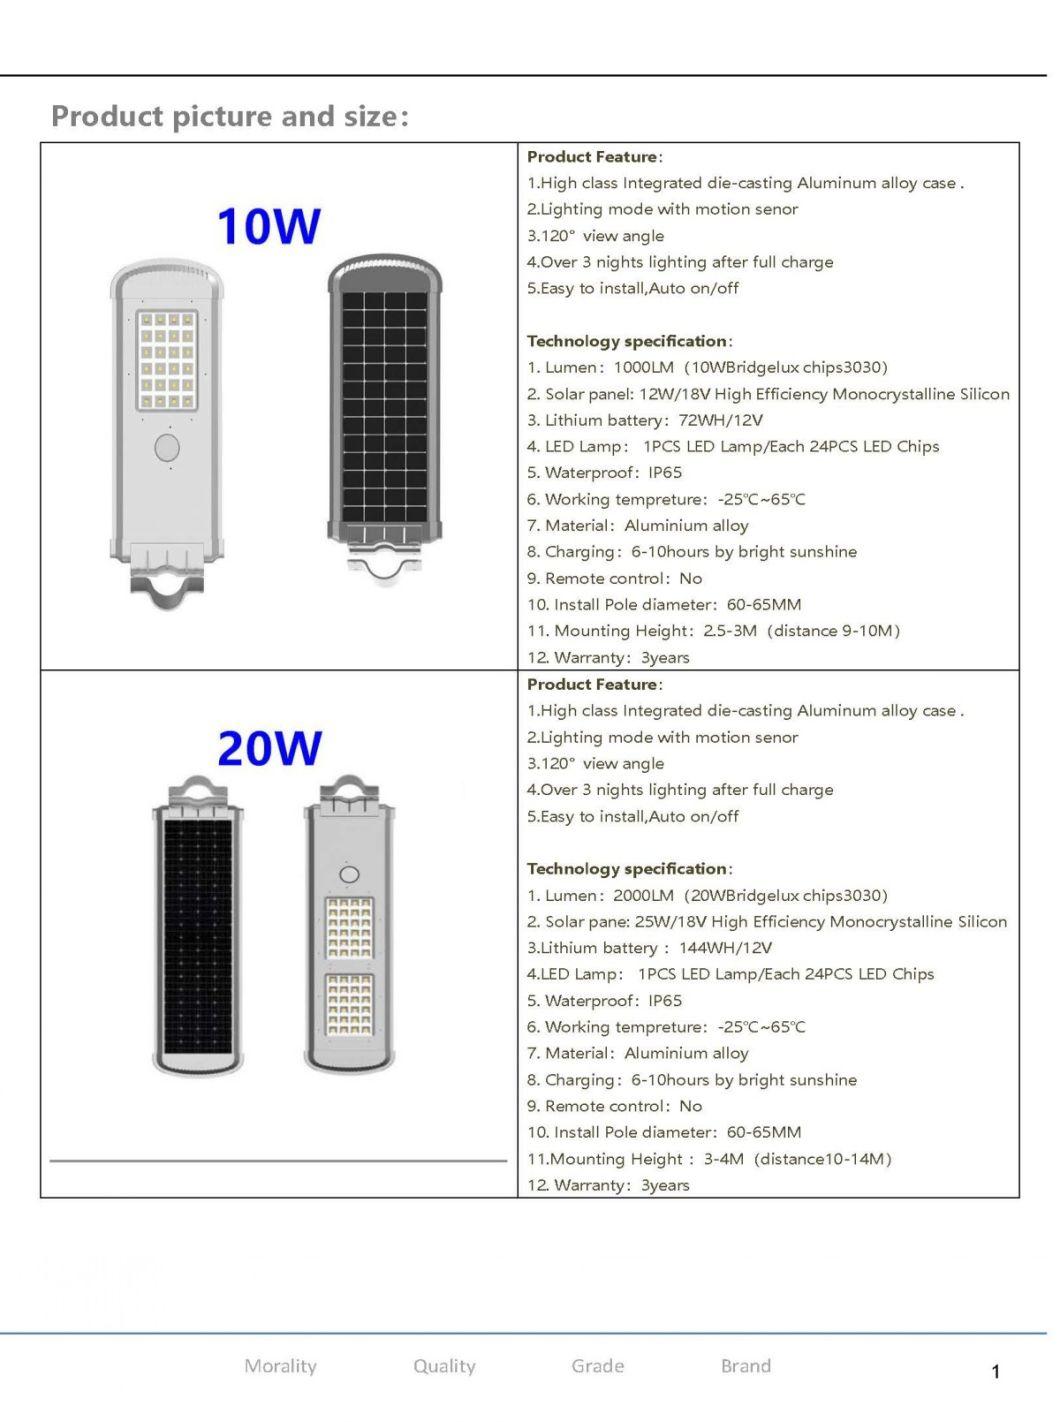 Rygh-G80 Industrial Solar Energy All in One 80W LED Street Lights Outdoor 8000lm